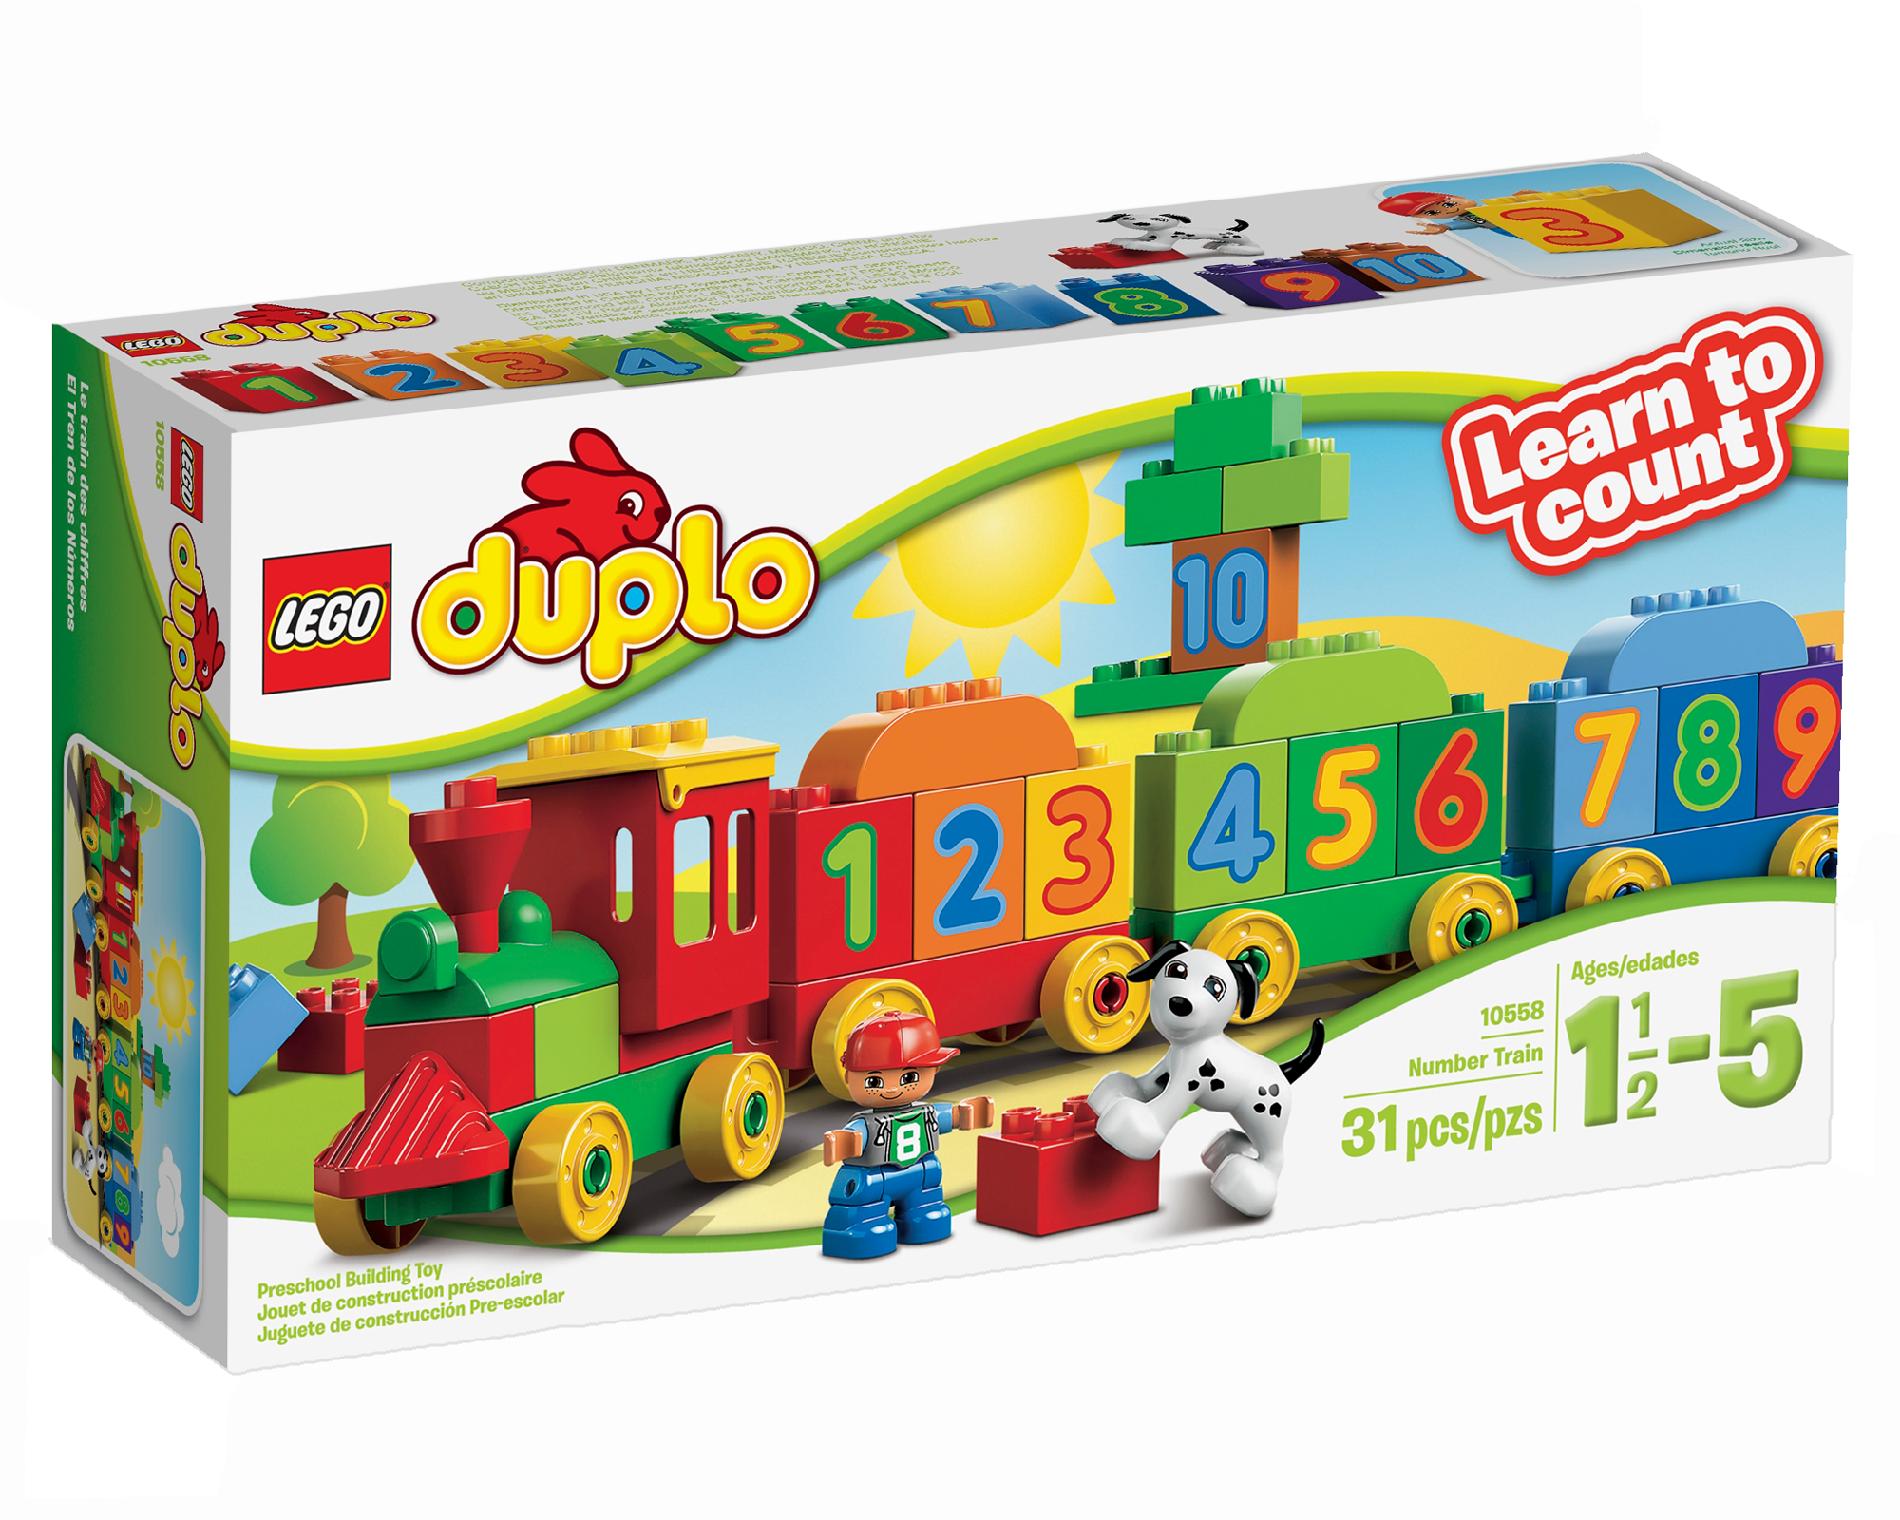 LEGO Duplo My First Number Train—$15.99!